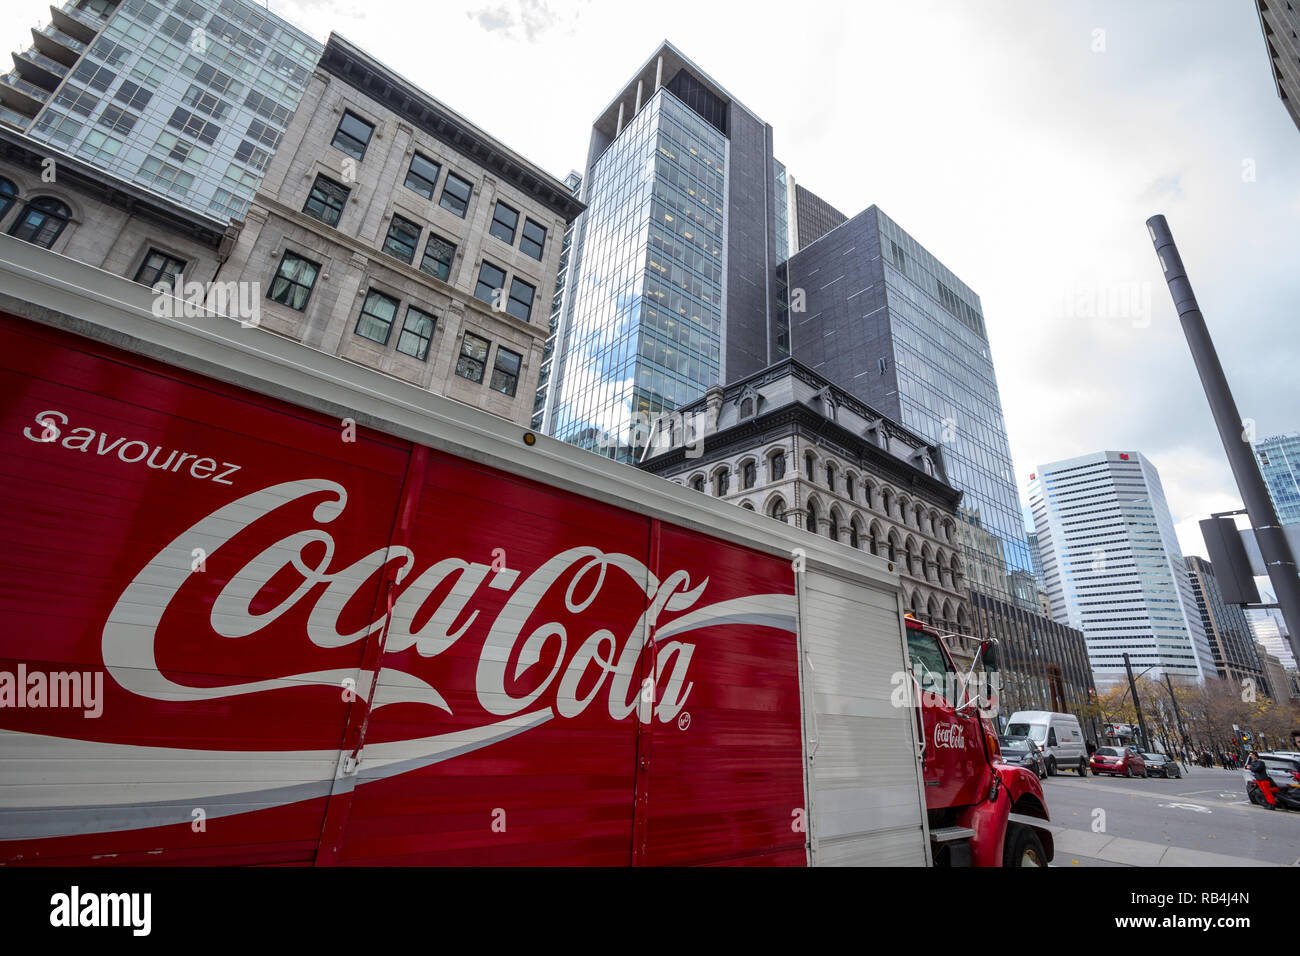 MONTREAL, CANADA - NOVEMBER 7, 2018: Coca Cola logo in on their delivery truck in the CBD of Montreal, Quebec, surrounded by business sckyscrapers.  C Stock Photo